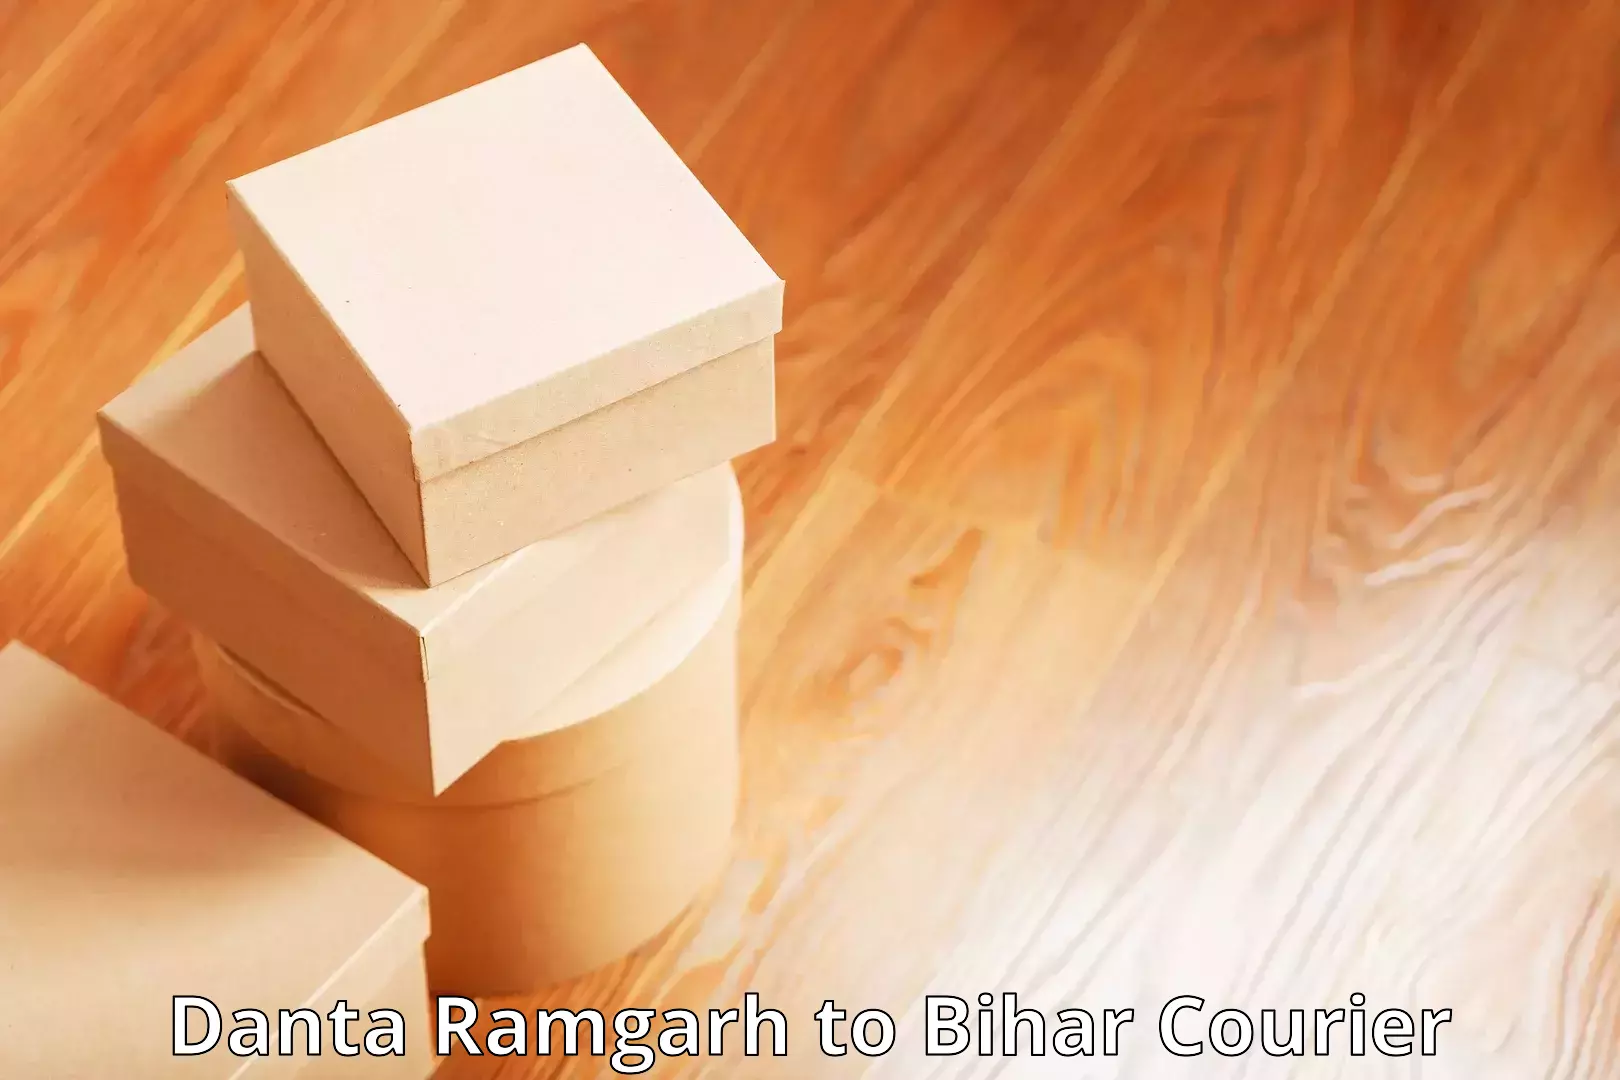 Full-service courier options Danta Ramgarh to Bagaha